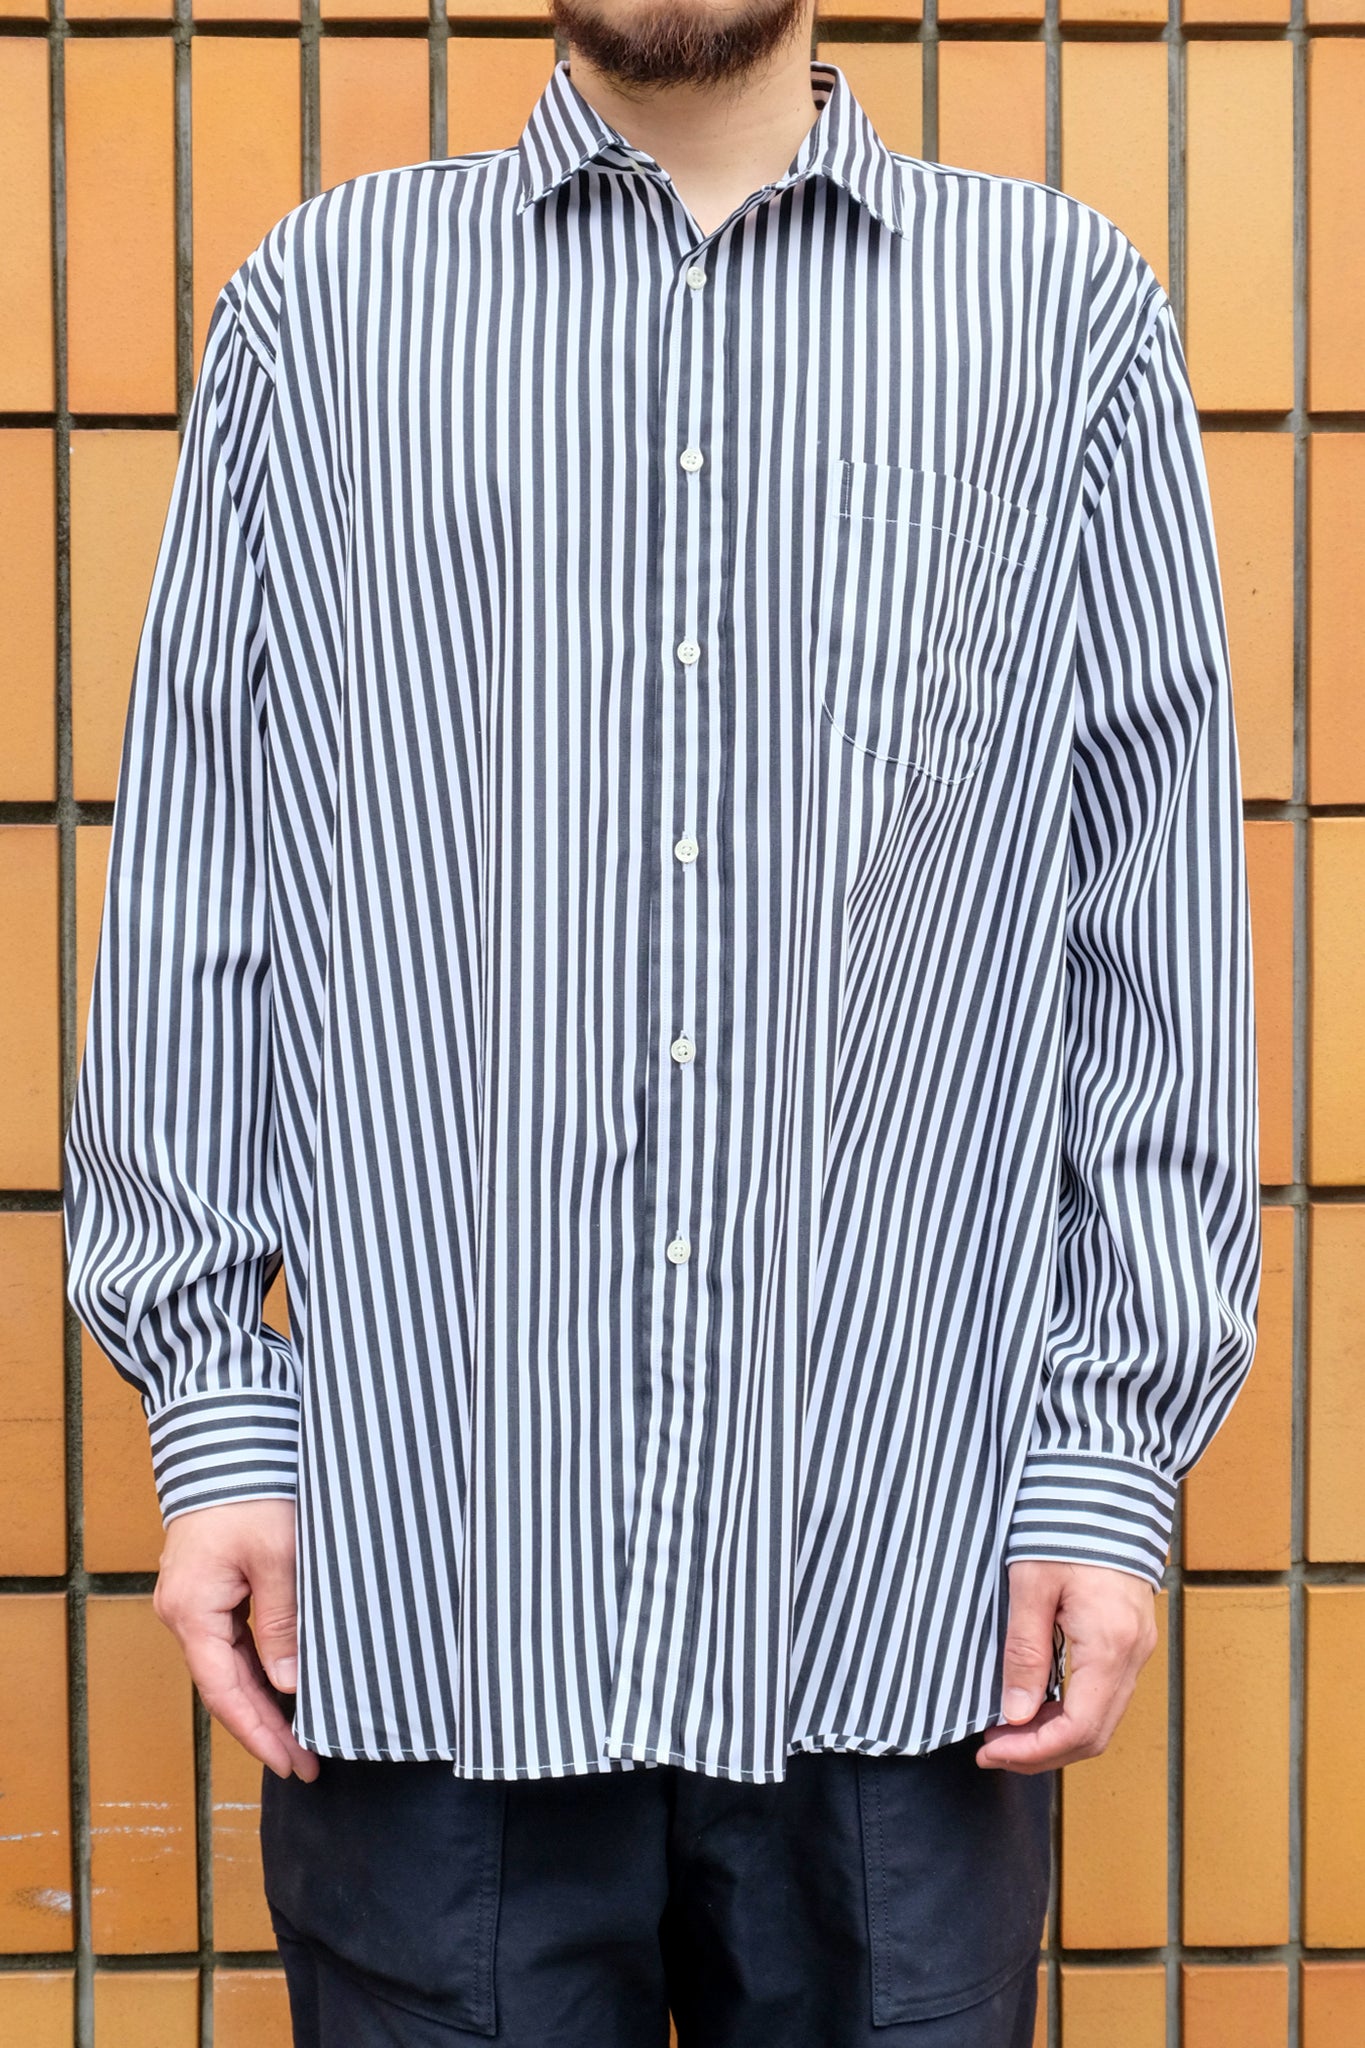 INDIVIDUALIZED SHIRTS "[LOCALERS EXCLUSIVE] BARBER STRIPE LONG SLEEVE SHIRT"